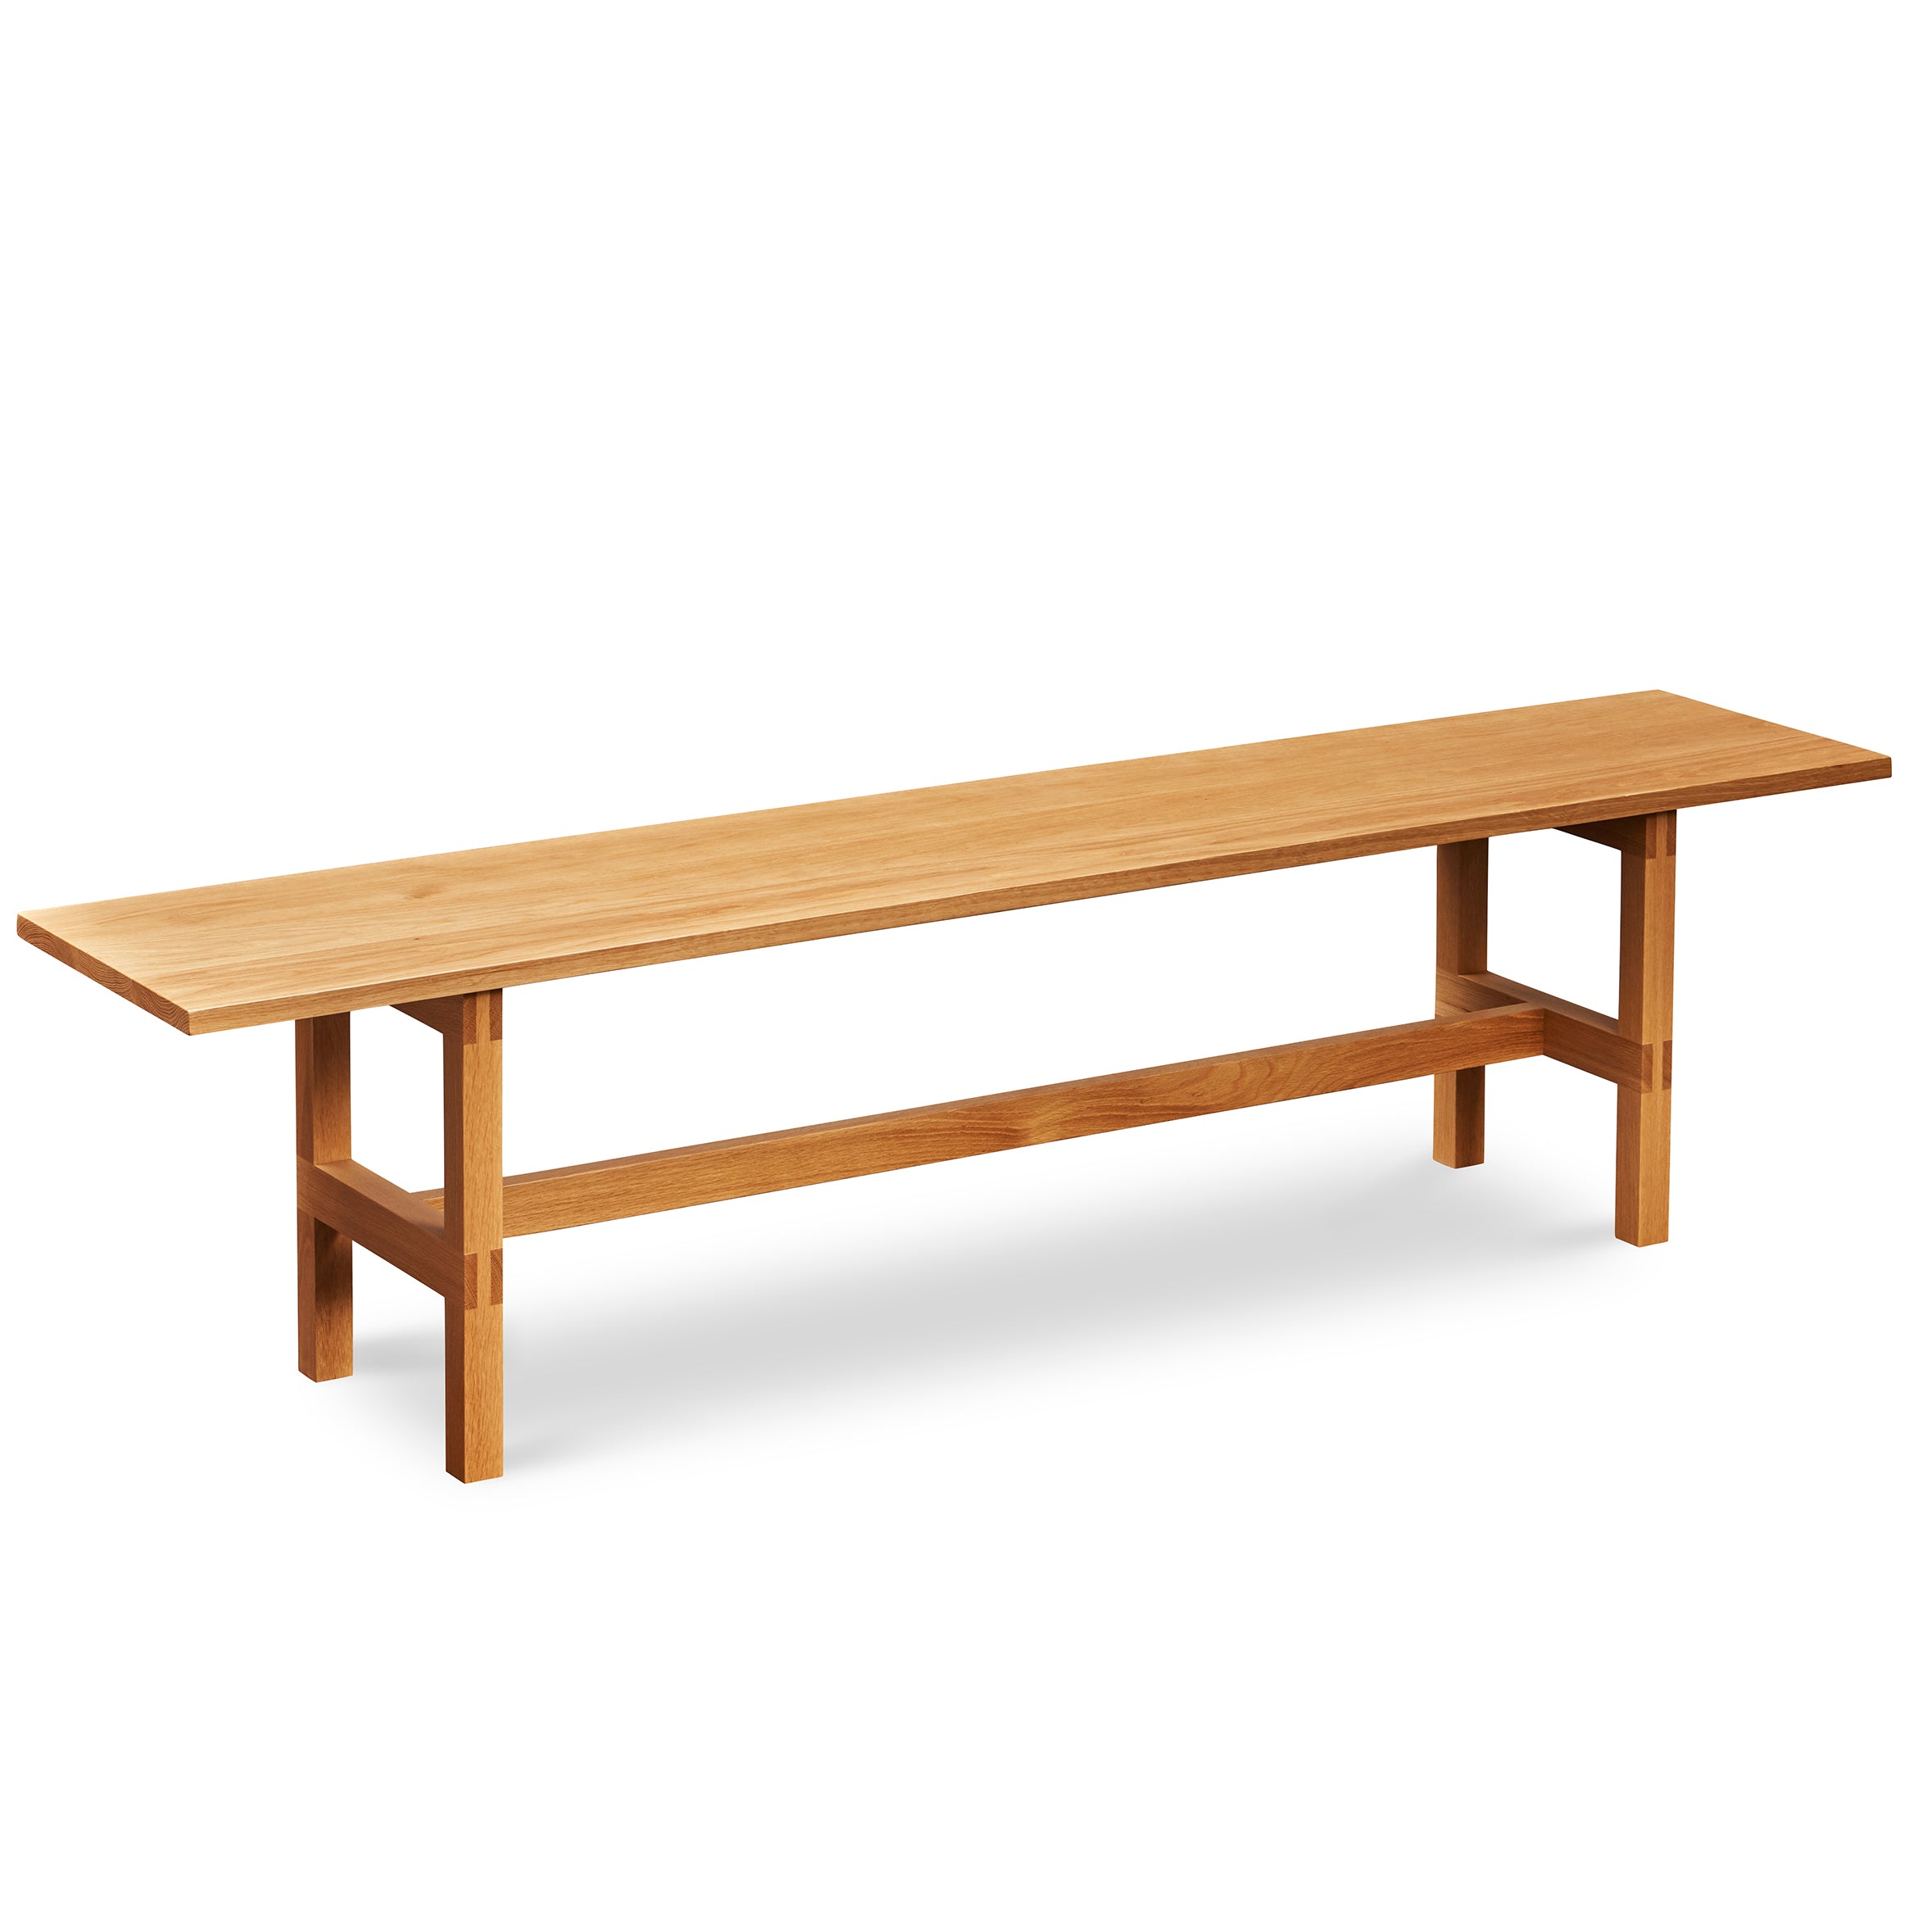 Modern trestle bench with visible joinery in white oak wood, from Maine's Chilton Furniture